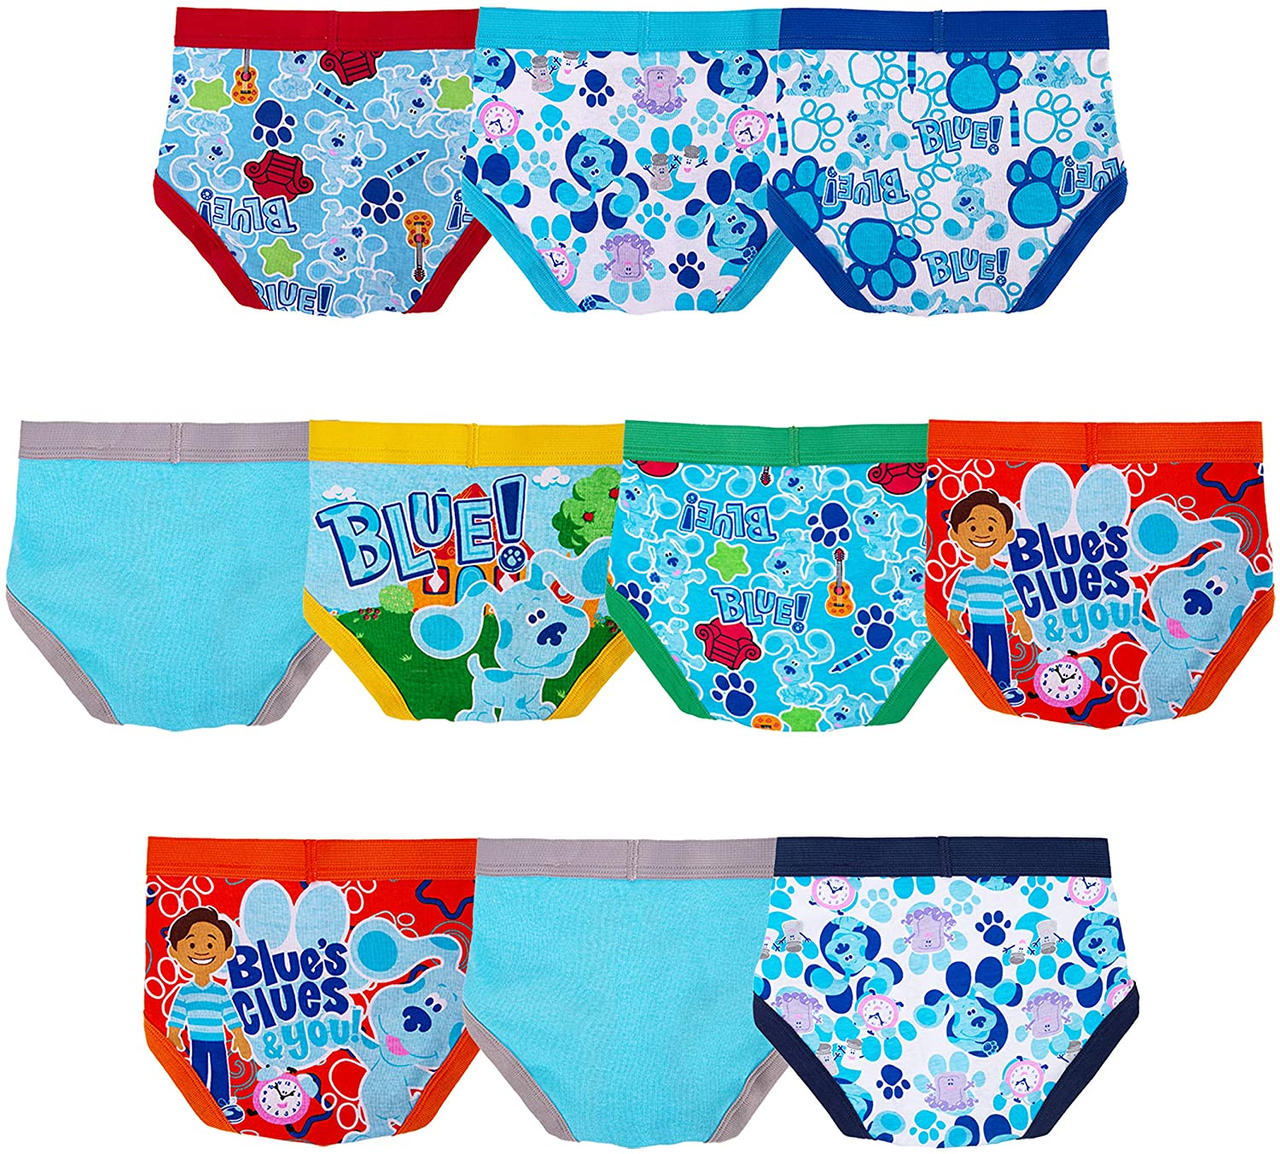 Blue's Clues and You! Boys' Underwear Multipacks by Jack1set2 on DeviantArt